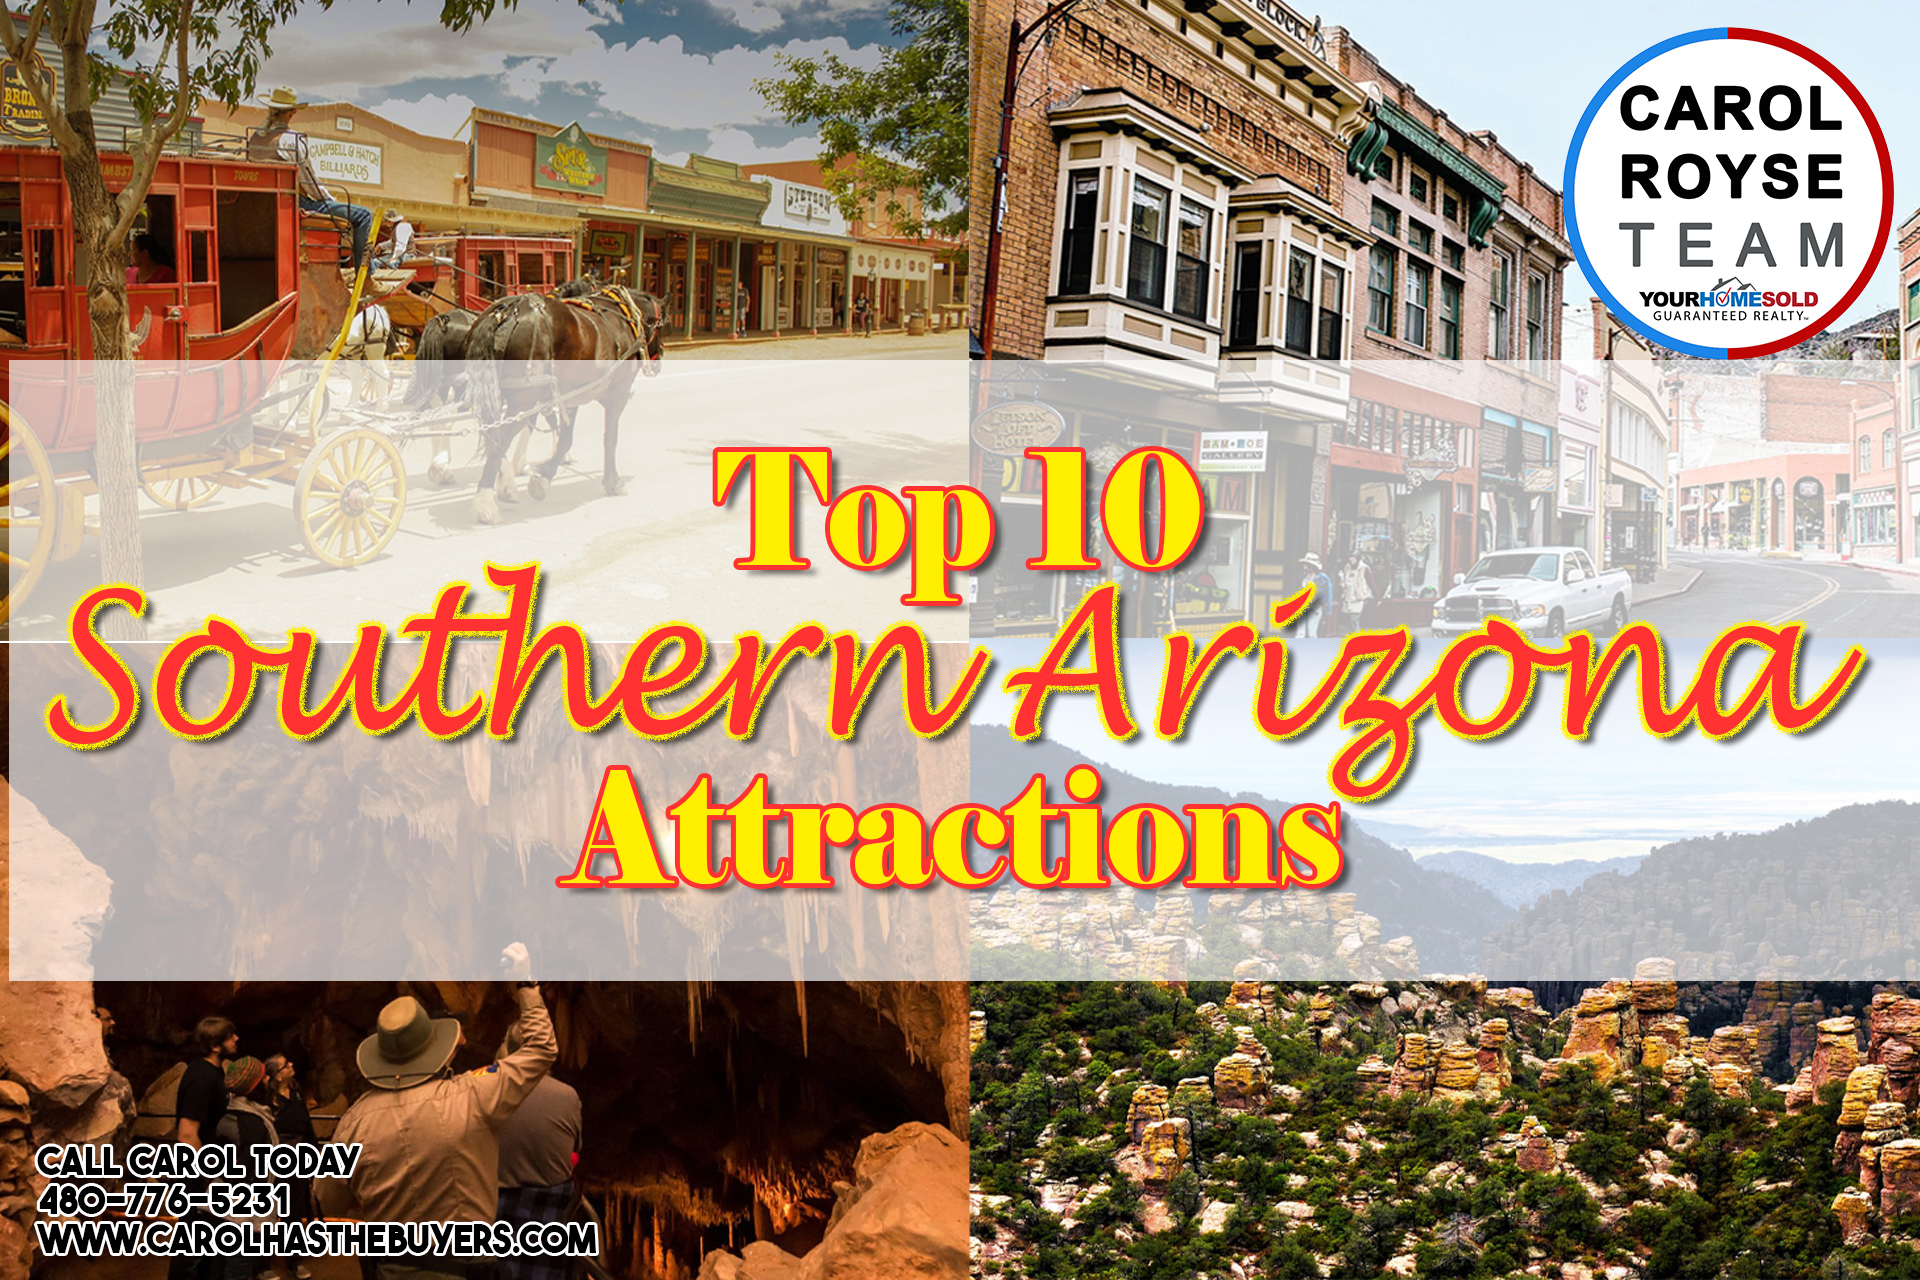 Top 10 Southern Arizona Attractions